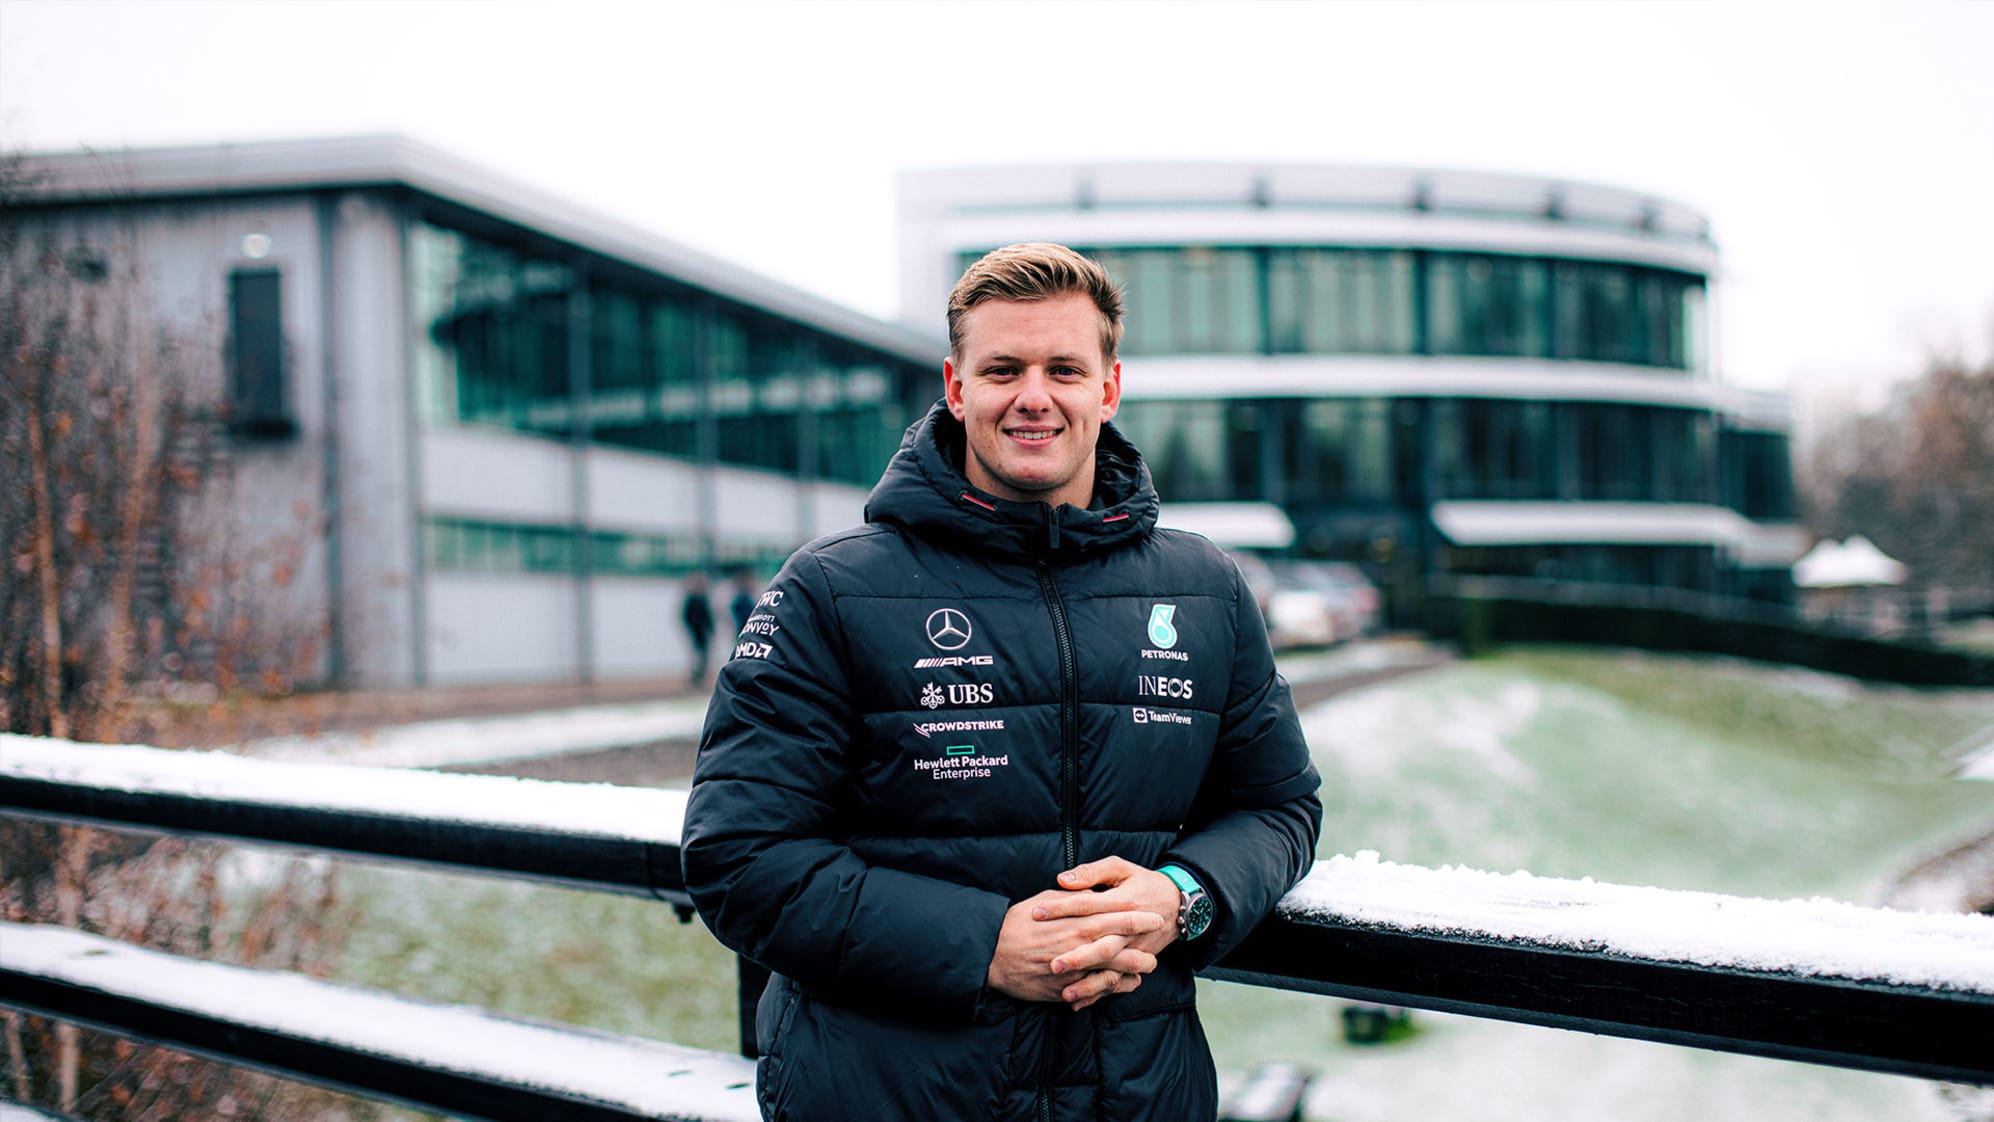 Mick Schumacher in front of the Mercedes F1 Headquarters